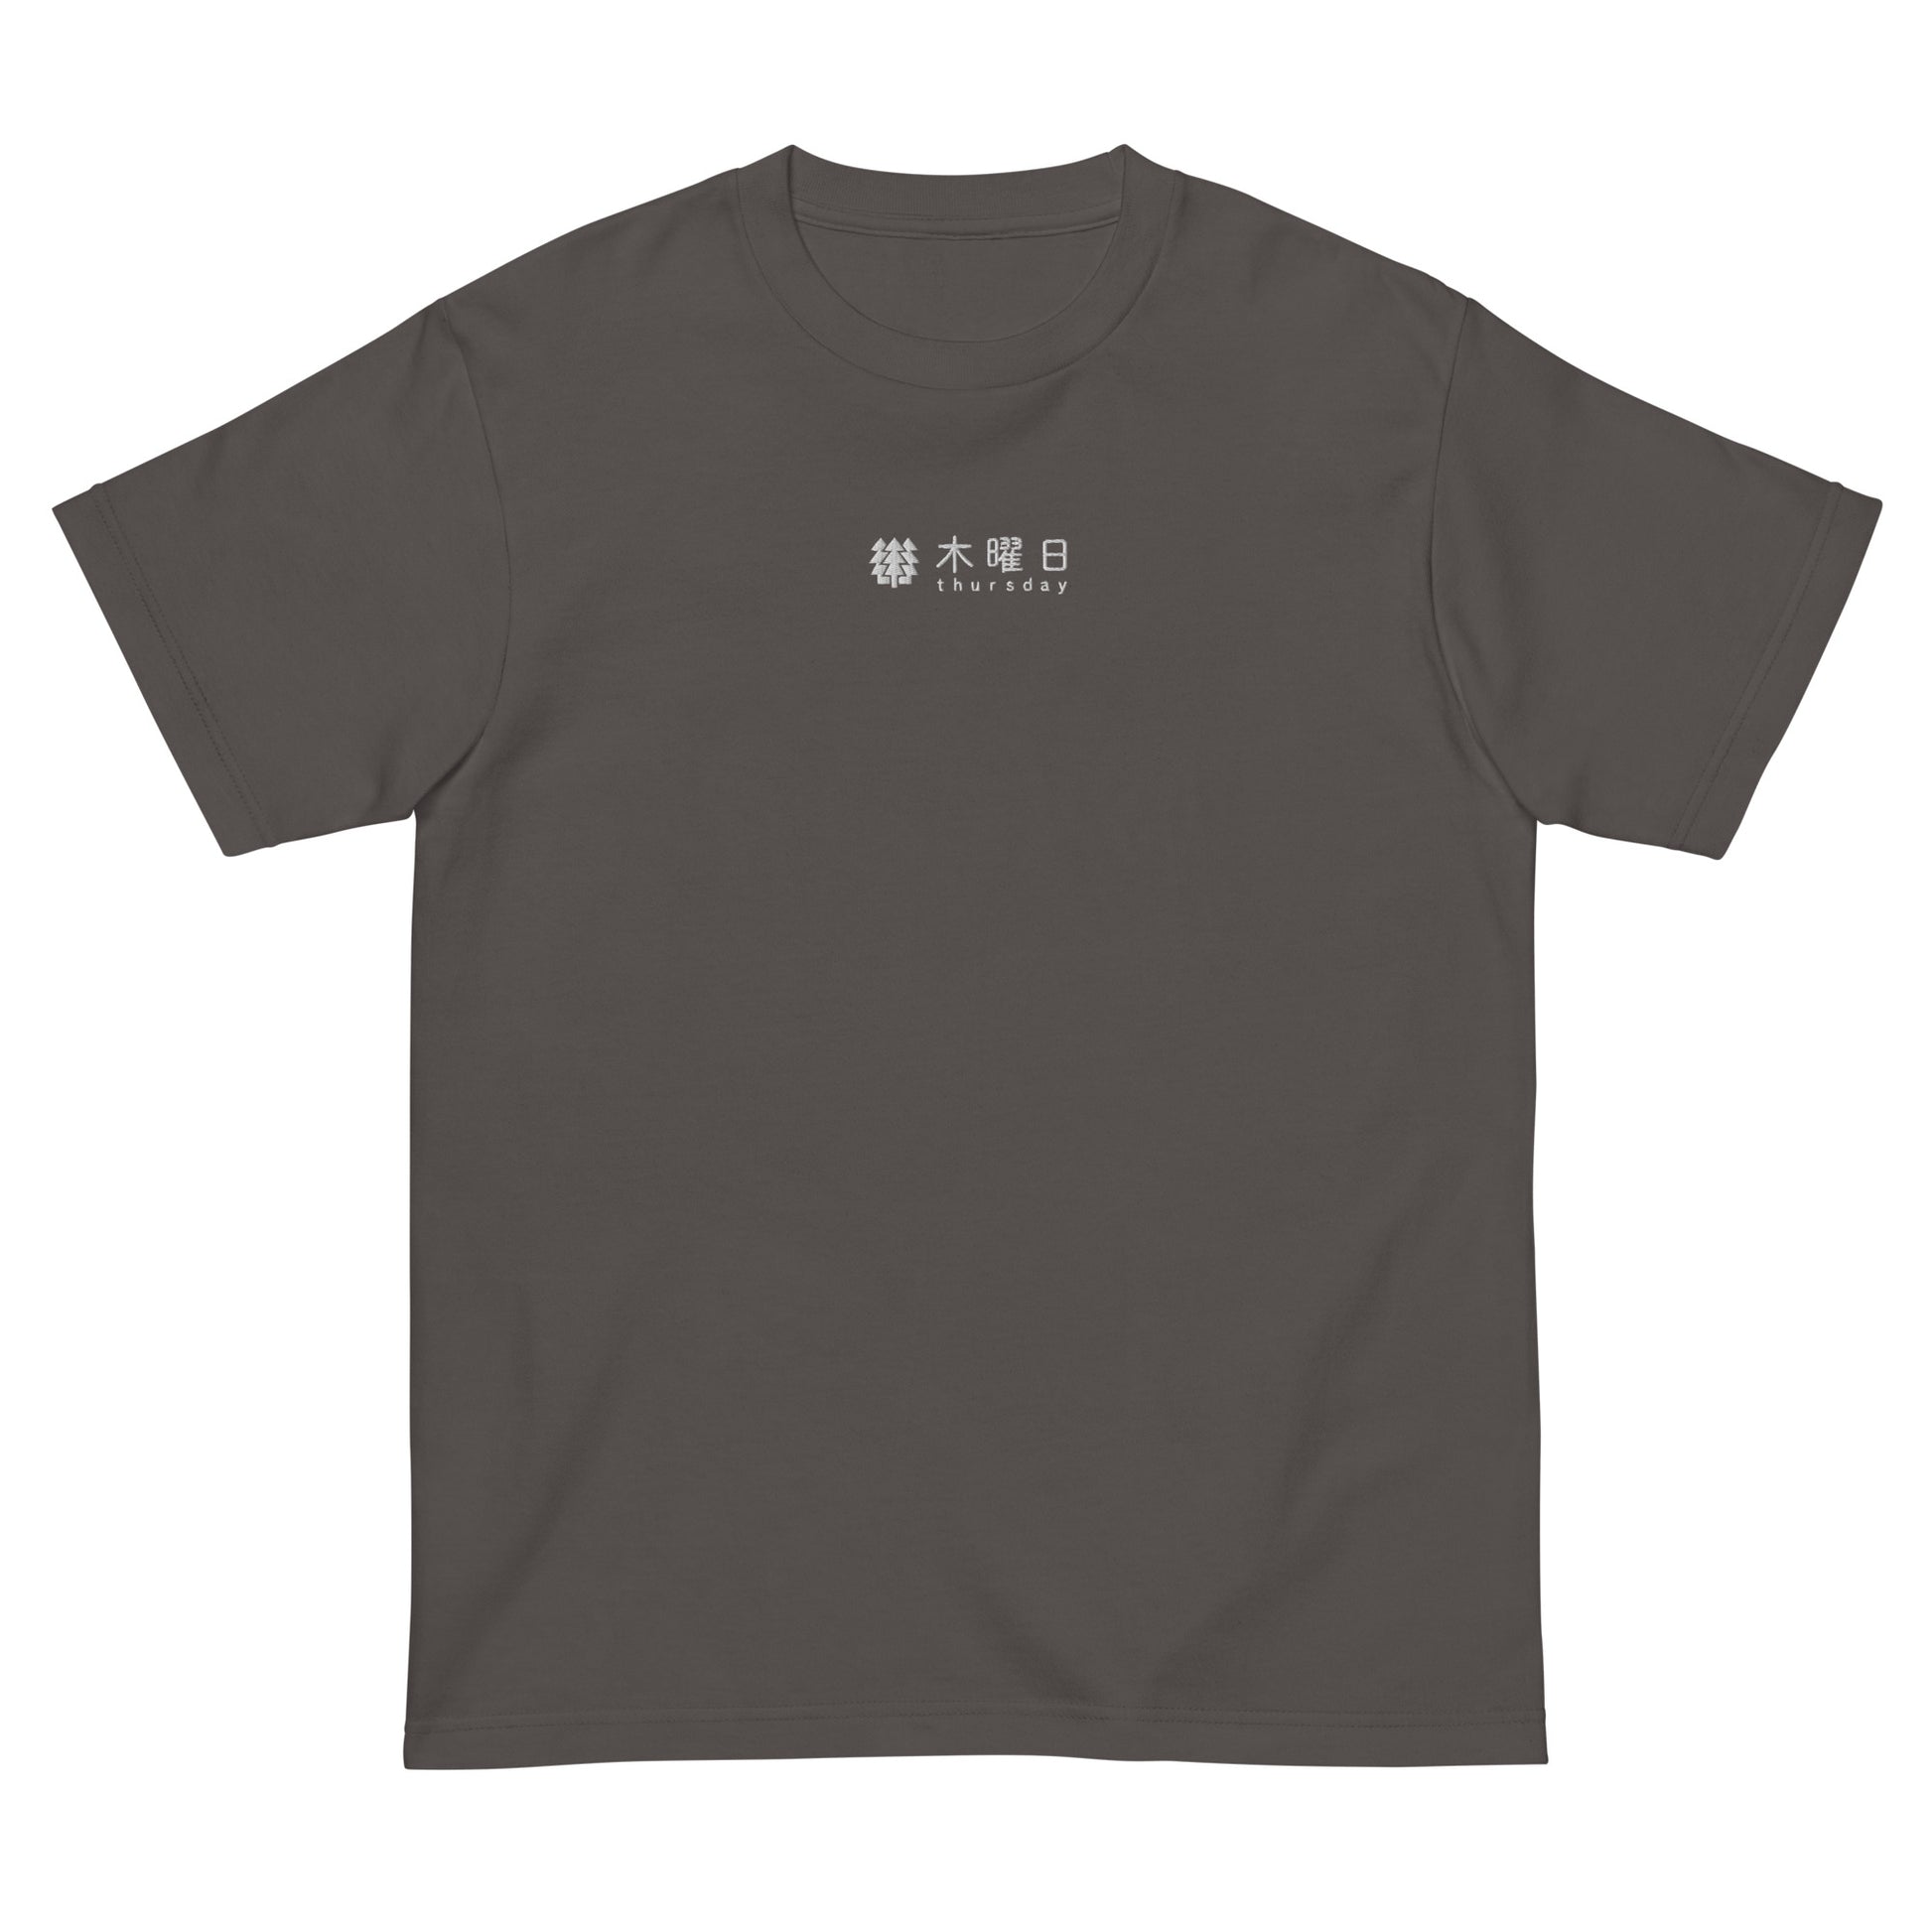 Dark Gray High Quality Tee - Front Design with an White Embroidery "Thursday" in Japanese and English